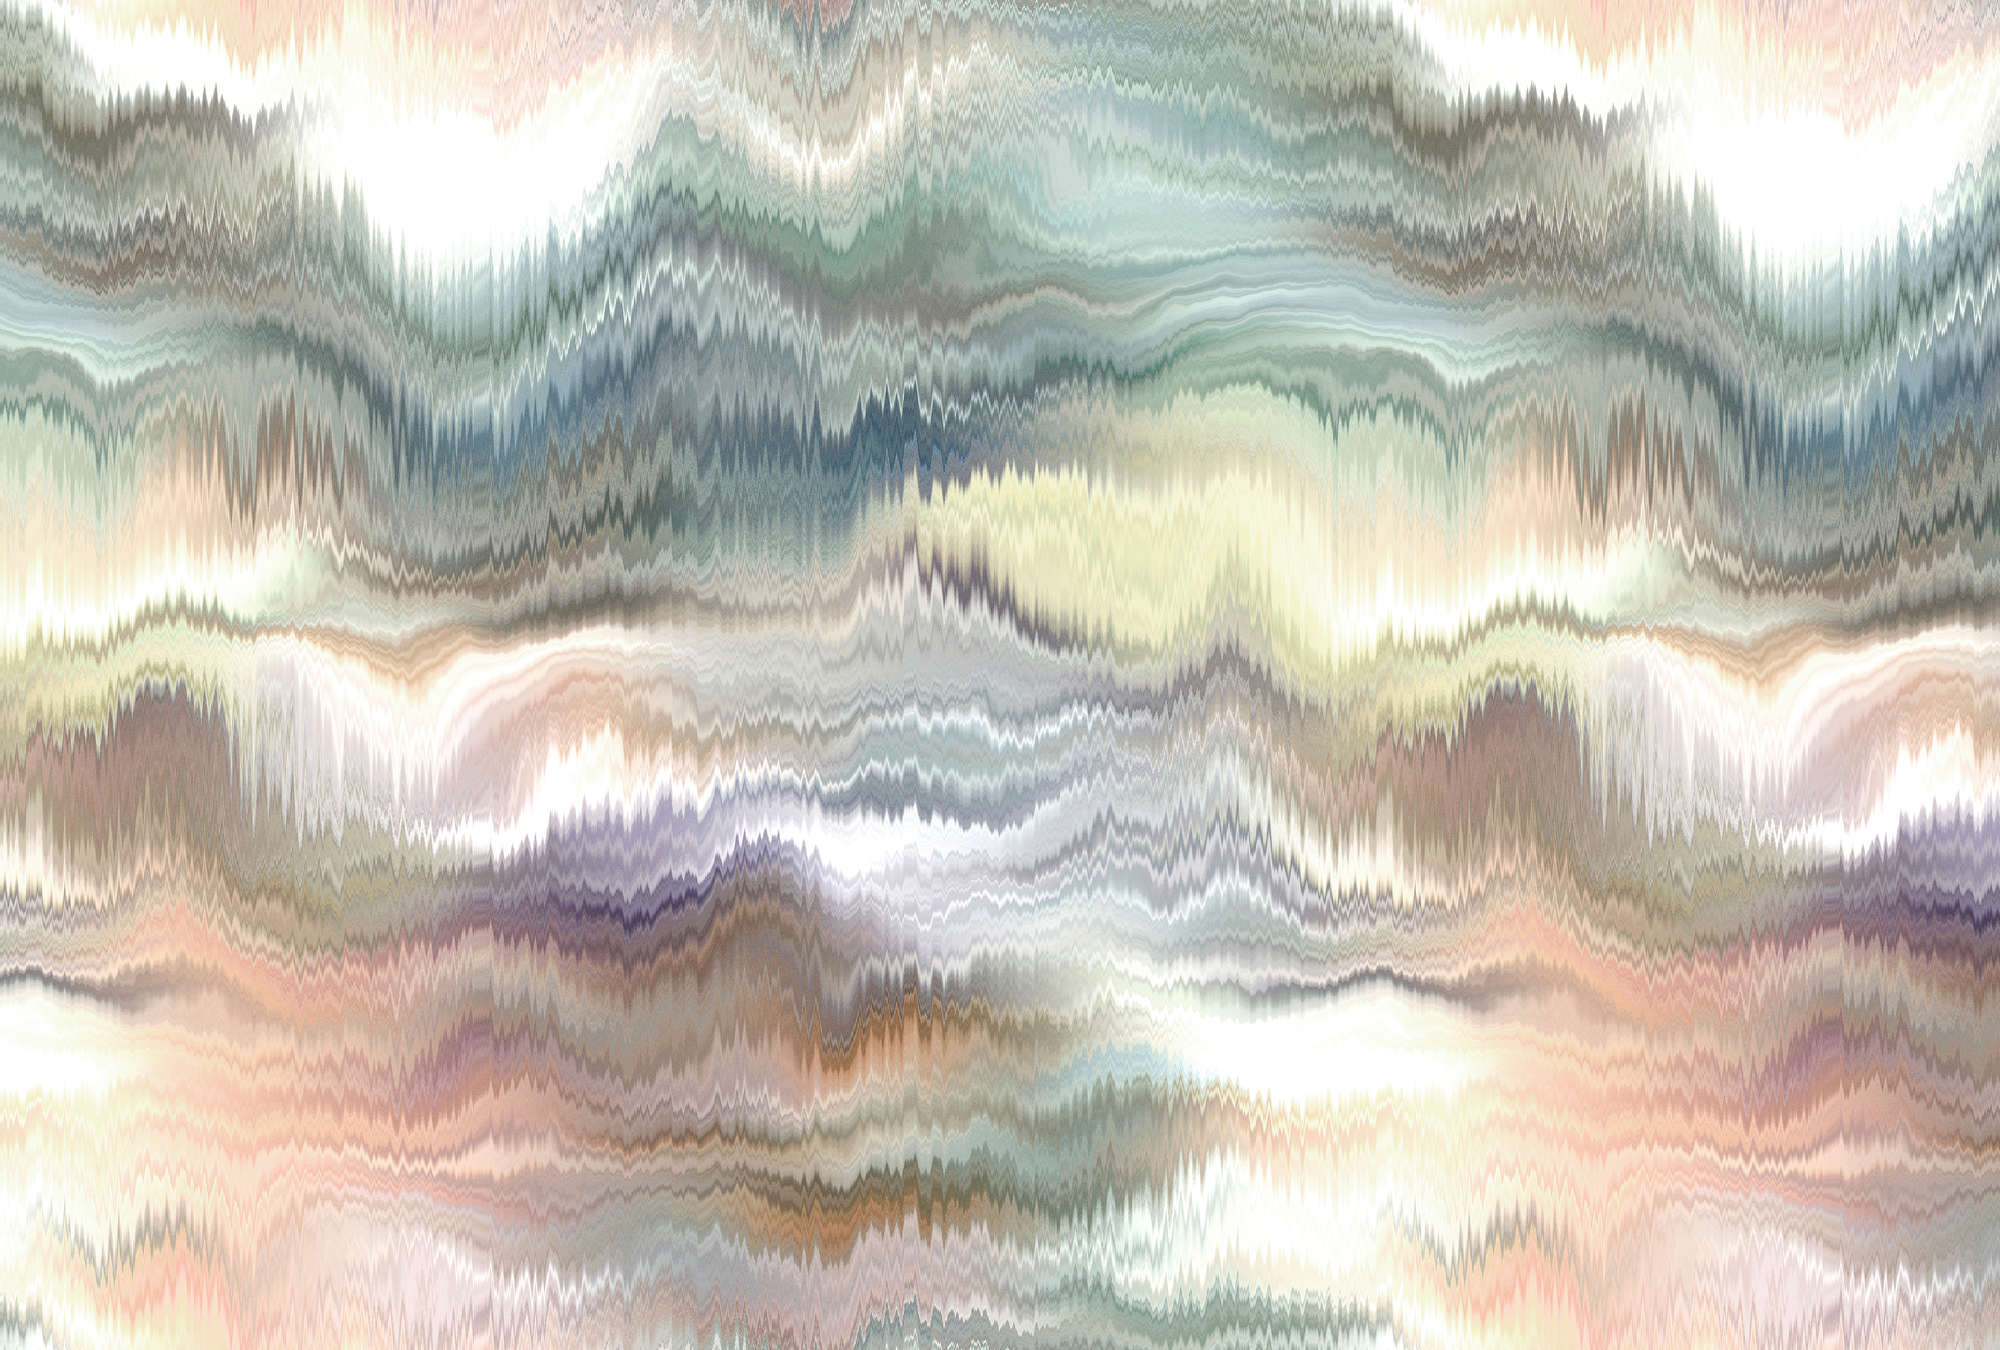             Pastel Palace 2 - Colorful mural pastel colours & abstract pattern
        